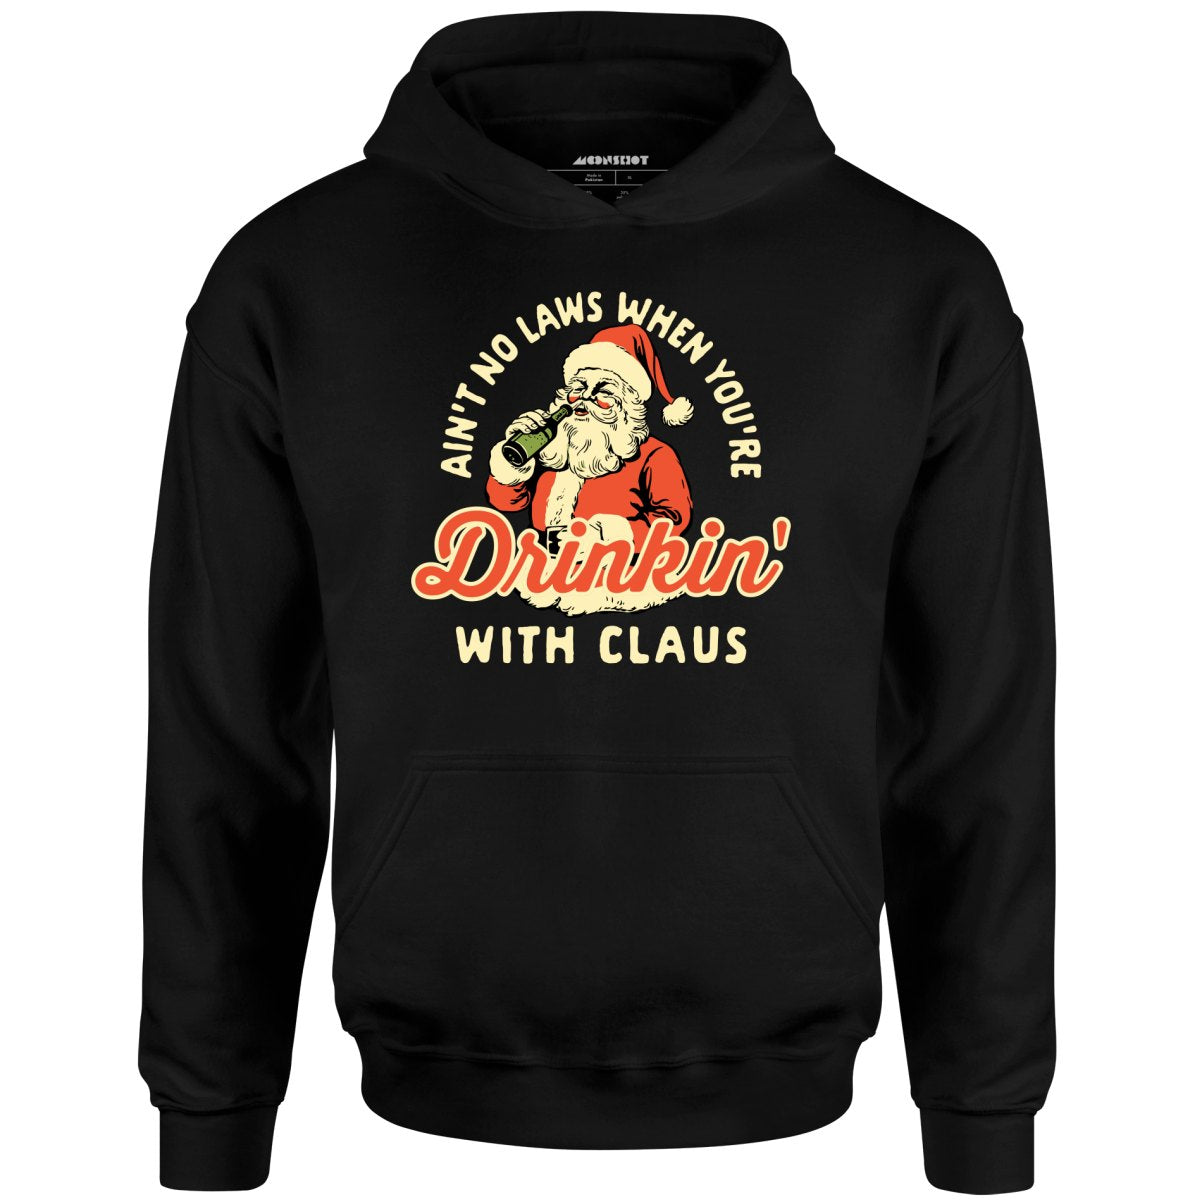 Ain't No Laws When You're Drinkin' With Claus - Unisex Hoodie